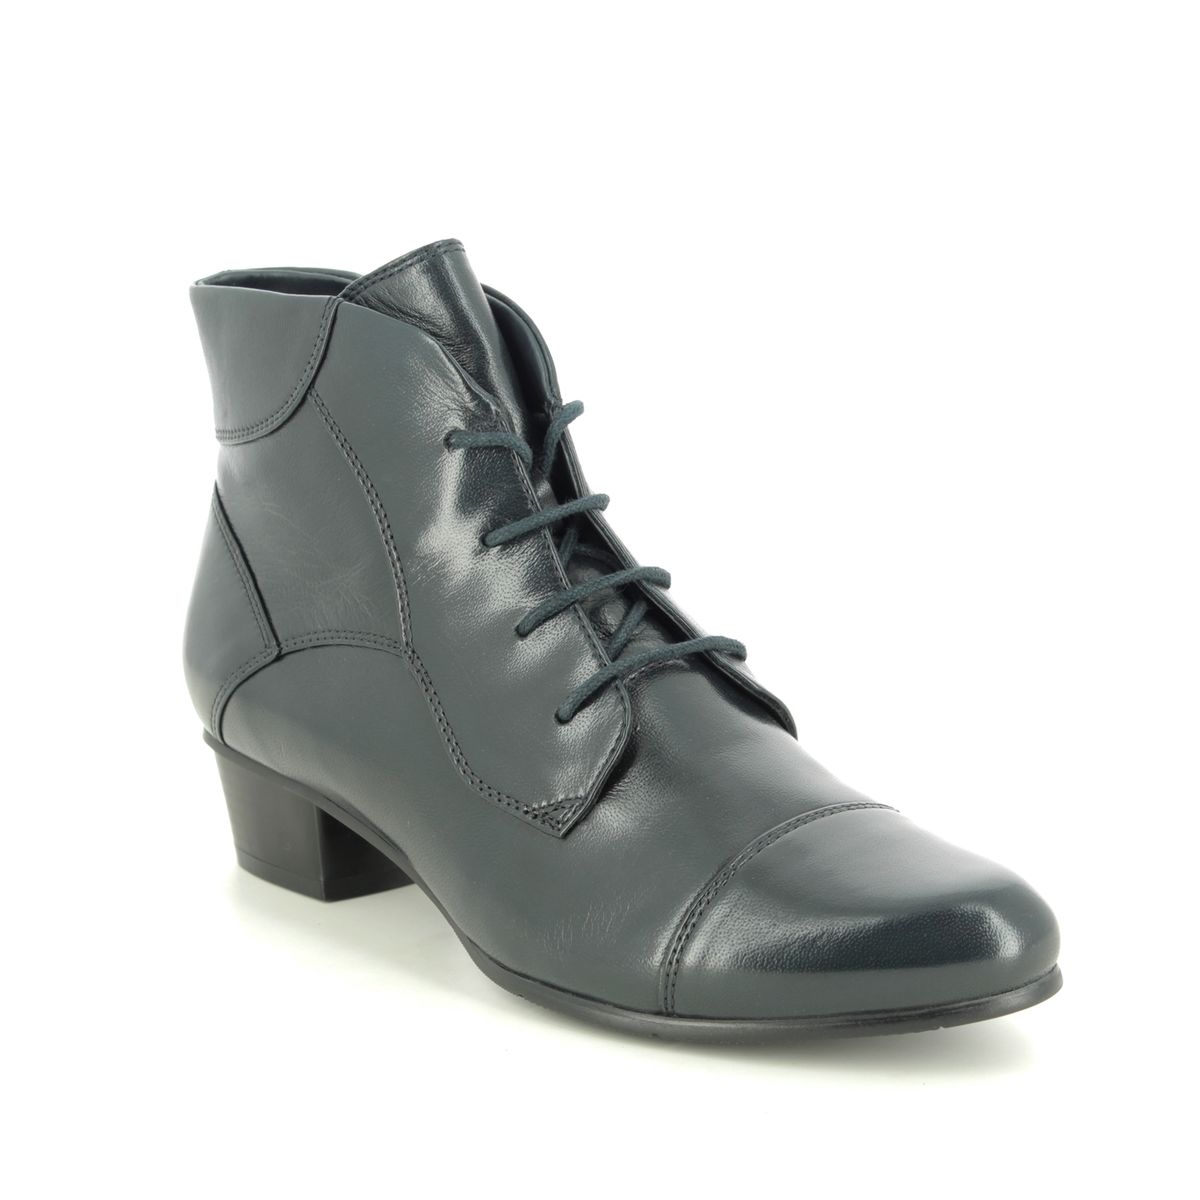 Regarde Le Ciel Stefany 123 Lace Navy Leather Womens Boots 0123-150 Ankle Boots In Soft Navy Leather Leather In Size 37